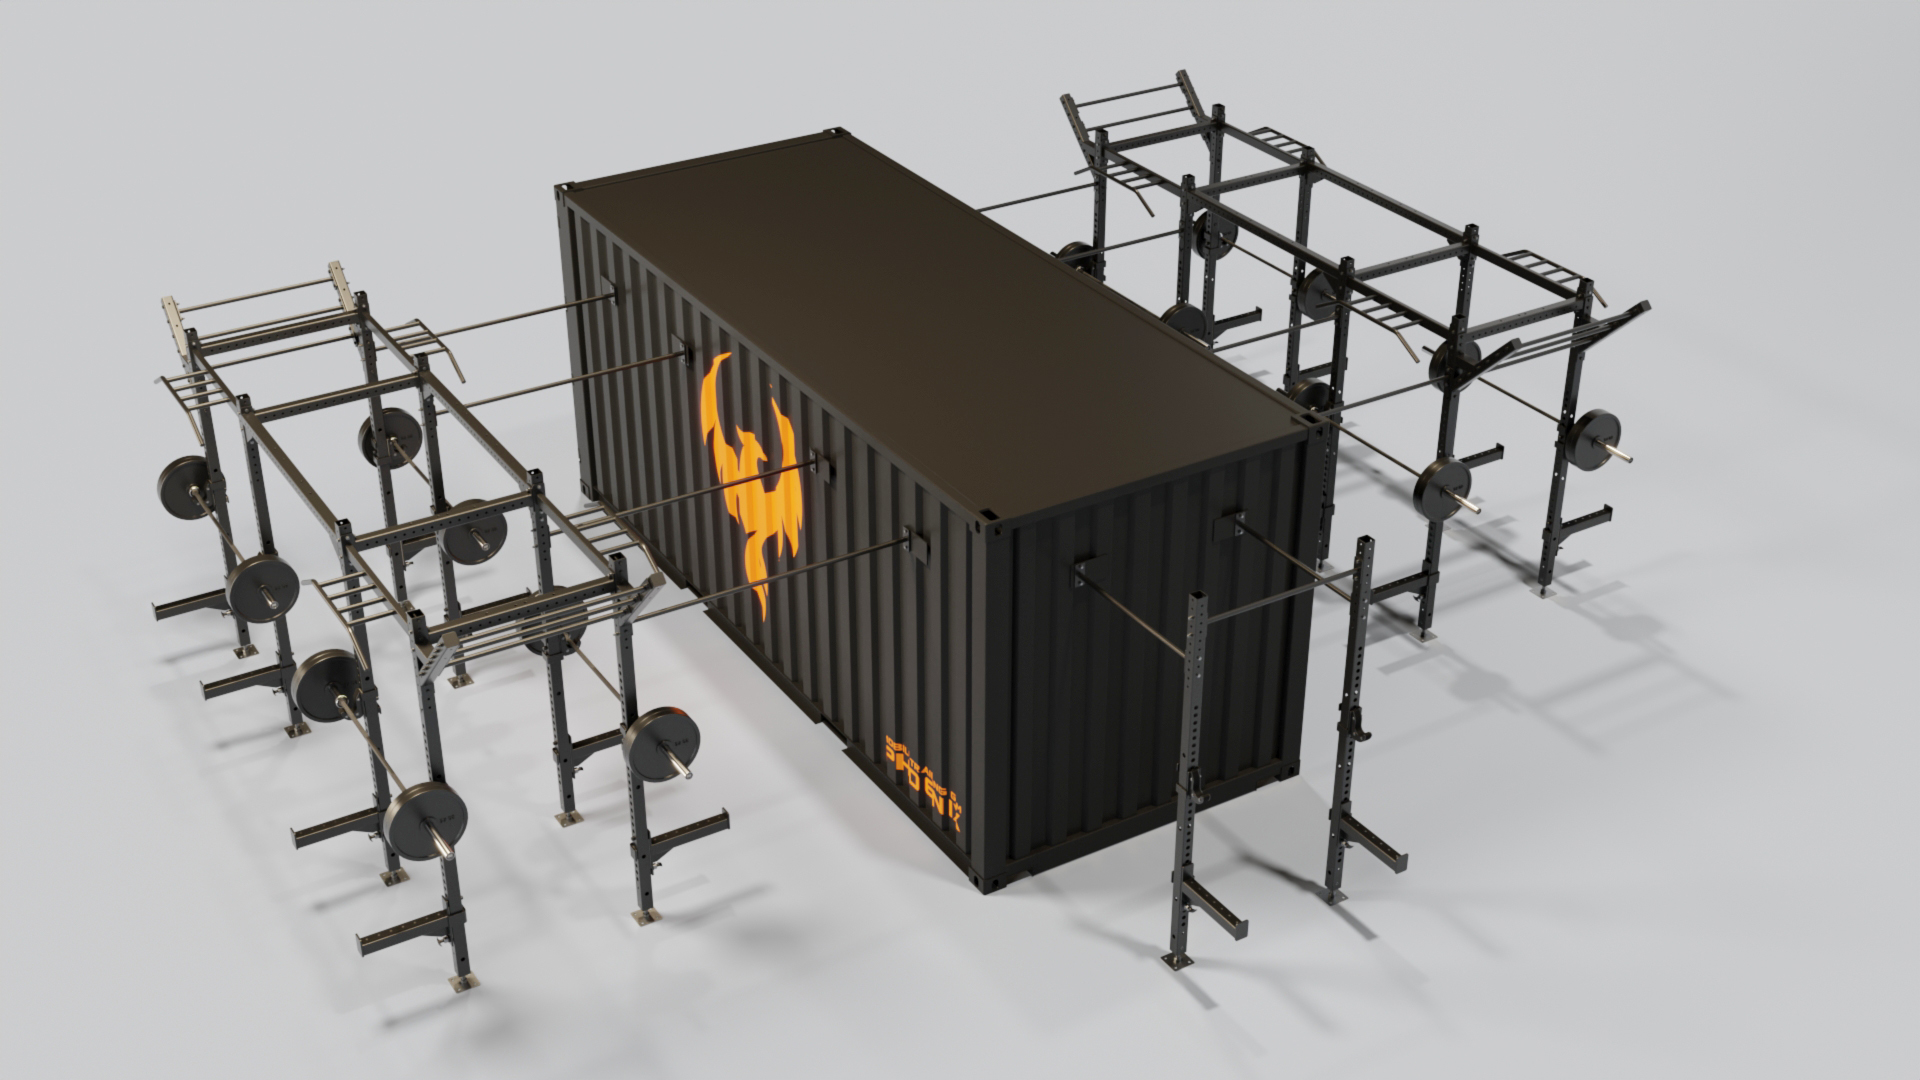 Featured image for “Phoenix MTG 20 - Mobile Training Gym”